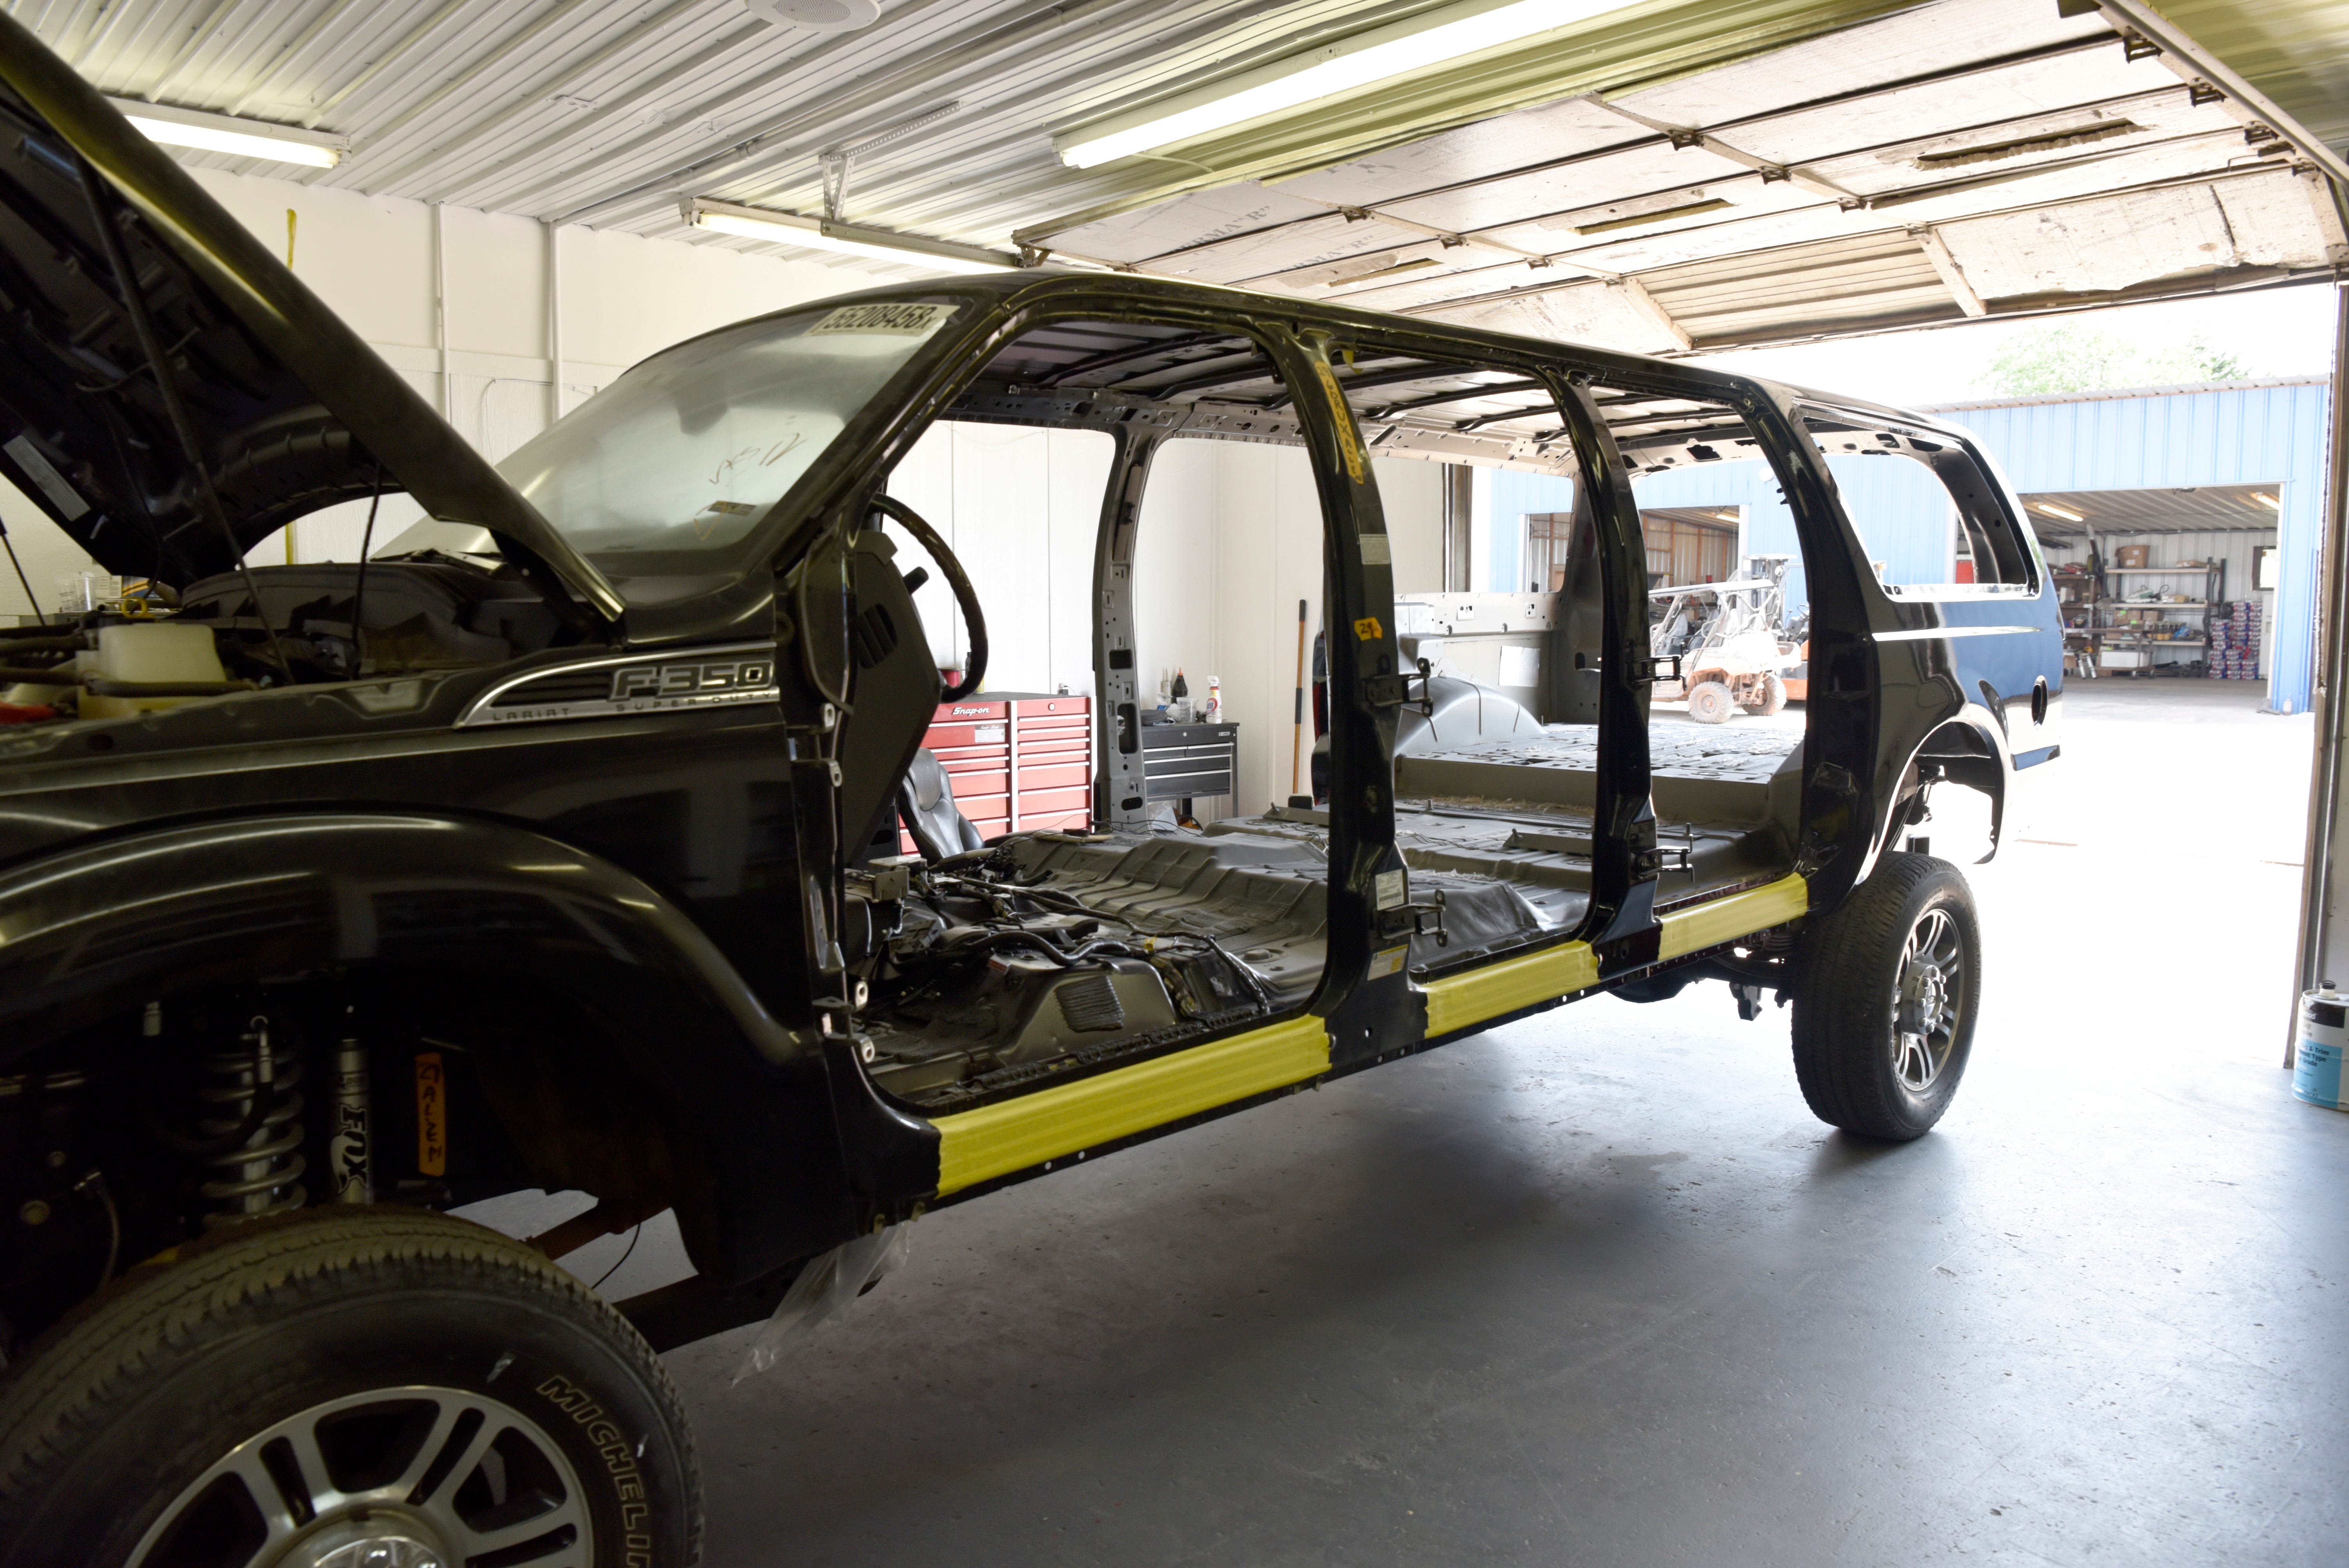 A custom six door Ford Excursion waits to be outfitted with an interior.